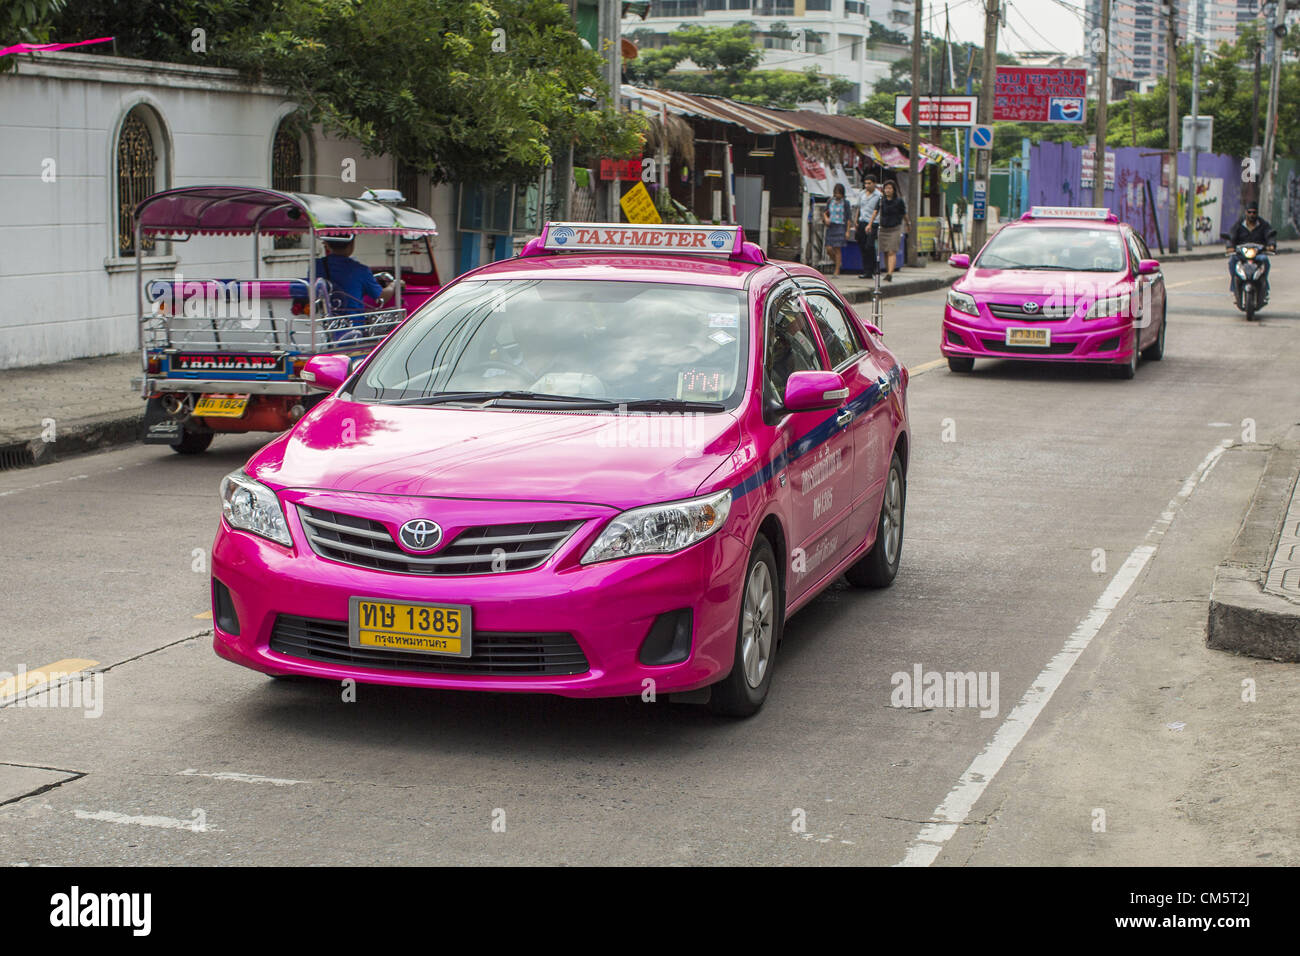 Oct. 11, 2012 - Bangkok, Thailand - Toyota Corollas in use as taxicabs on the street in Bangkok, Thailand. The Toyota Corolla is the backbone of the Thai taxi fleet. About 160,000 units of Toyota's popular Camry and Corolla models produced between March 21, 2006 and May 31, 2010 in Thailand are part of Toyota Motor's global recall. Toyota Motor Corp said yesterday it would recall more than 7.4 million vehicles worldwide because the faulty power window switch was a potential fire hazard, the latest in a series of setbacks that have dented the reputation of Japan's biggest automaker. The volunta Stock Photo